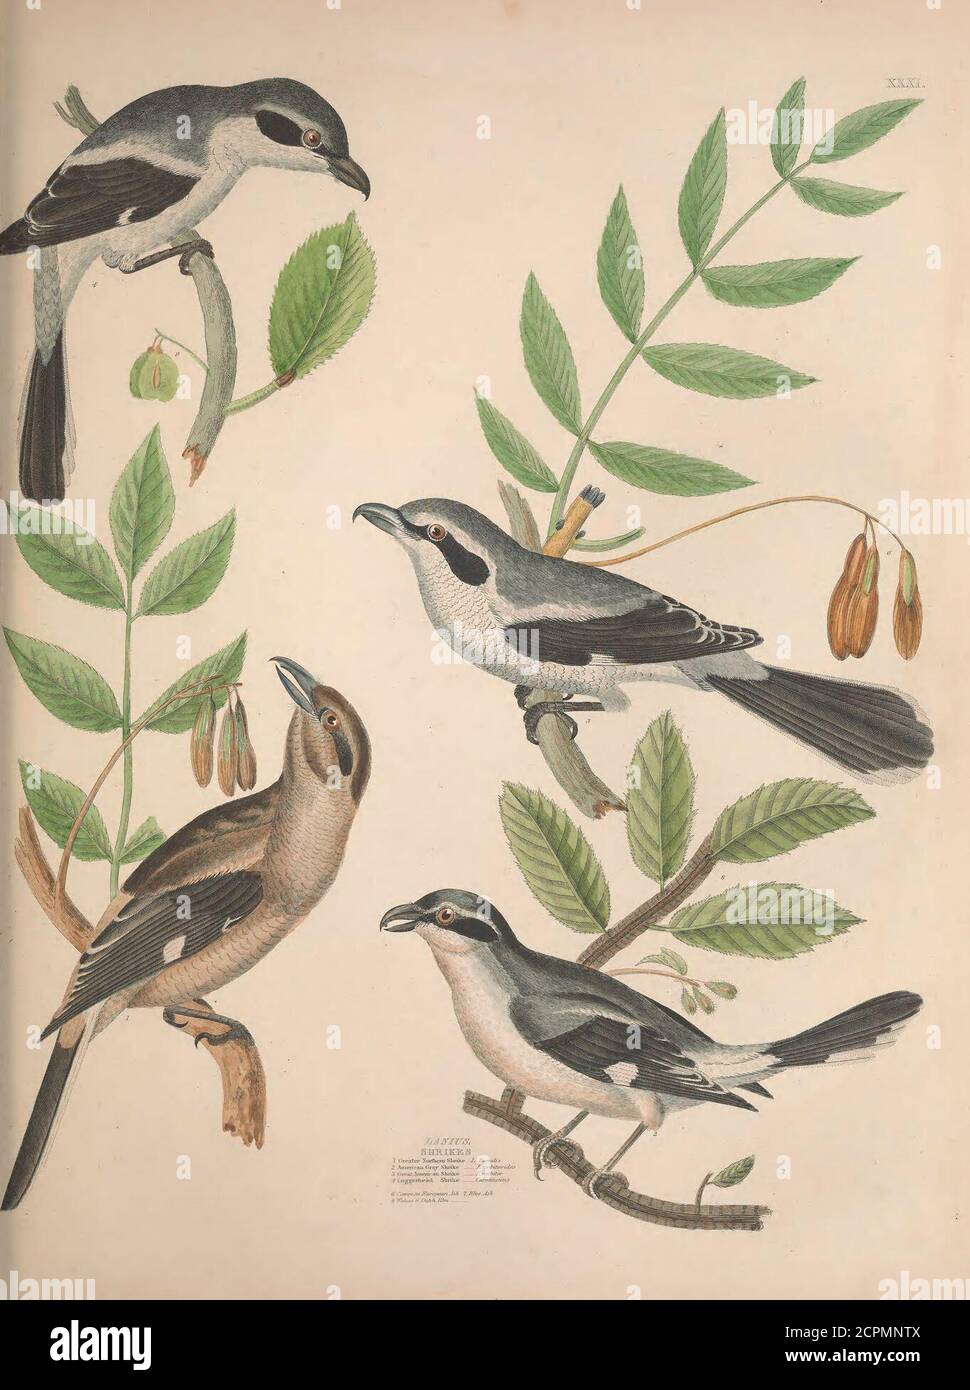 . Illustrations of the American ornithology of Alexander Wilson and Charles Lucian Bonaparte : with the addition of numerous recently discovered species and representations of the whole sylvae of North America. . C1WCLJ7S. I PaH;is Dipper. CTaUasii 3 Diea^ius Violaceus 4 P° Splendidus. 5 D? Seulptilus - MYOTMEMA.2 Rocky Mountain Alt catcher. M.nbsoleta,.6 Cucumber Tree./ Pap air.. Stock Photo